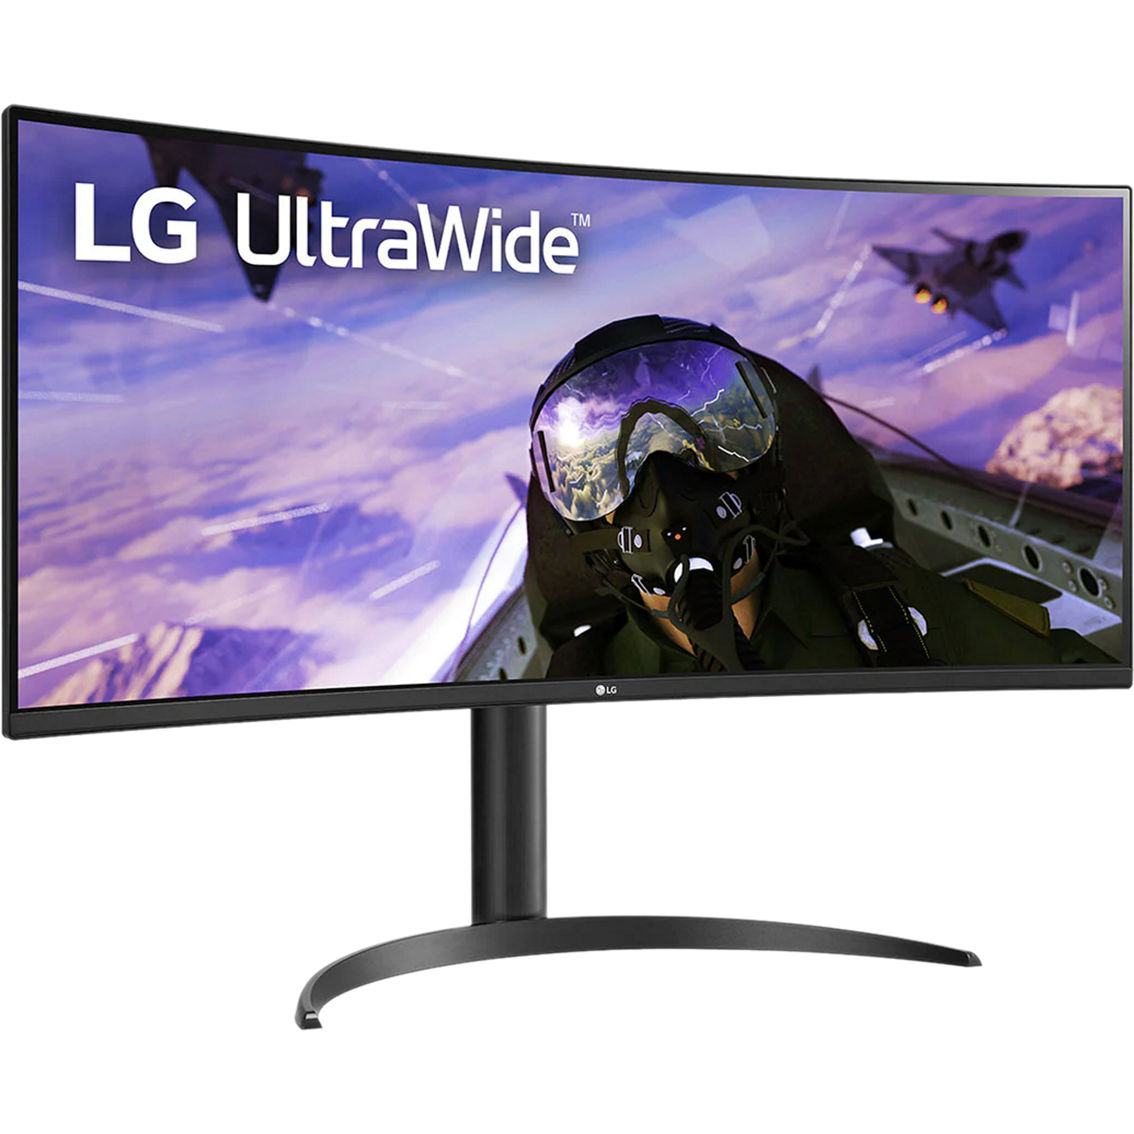 LG 34 in. Curved UltraWide QHD HDR 160Hz Monitor 34WP65C-B - Image 4 of 8